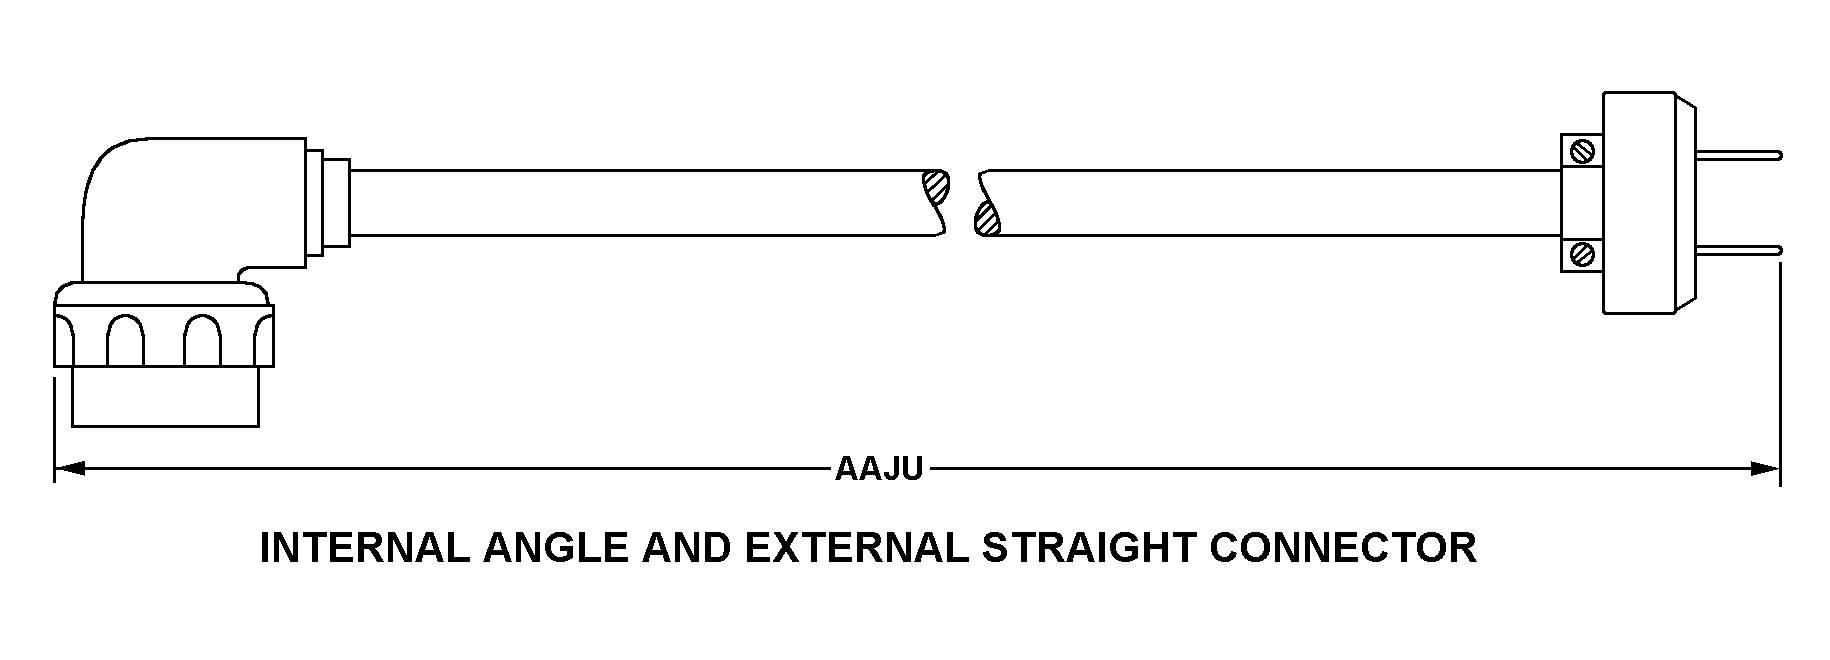 INTERNAL ANGLE AND EXTERNAL STRAIGHT CONNECTOR style nsn 5995-01-347-8957